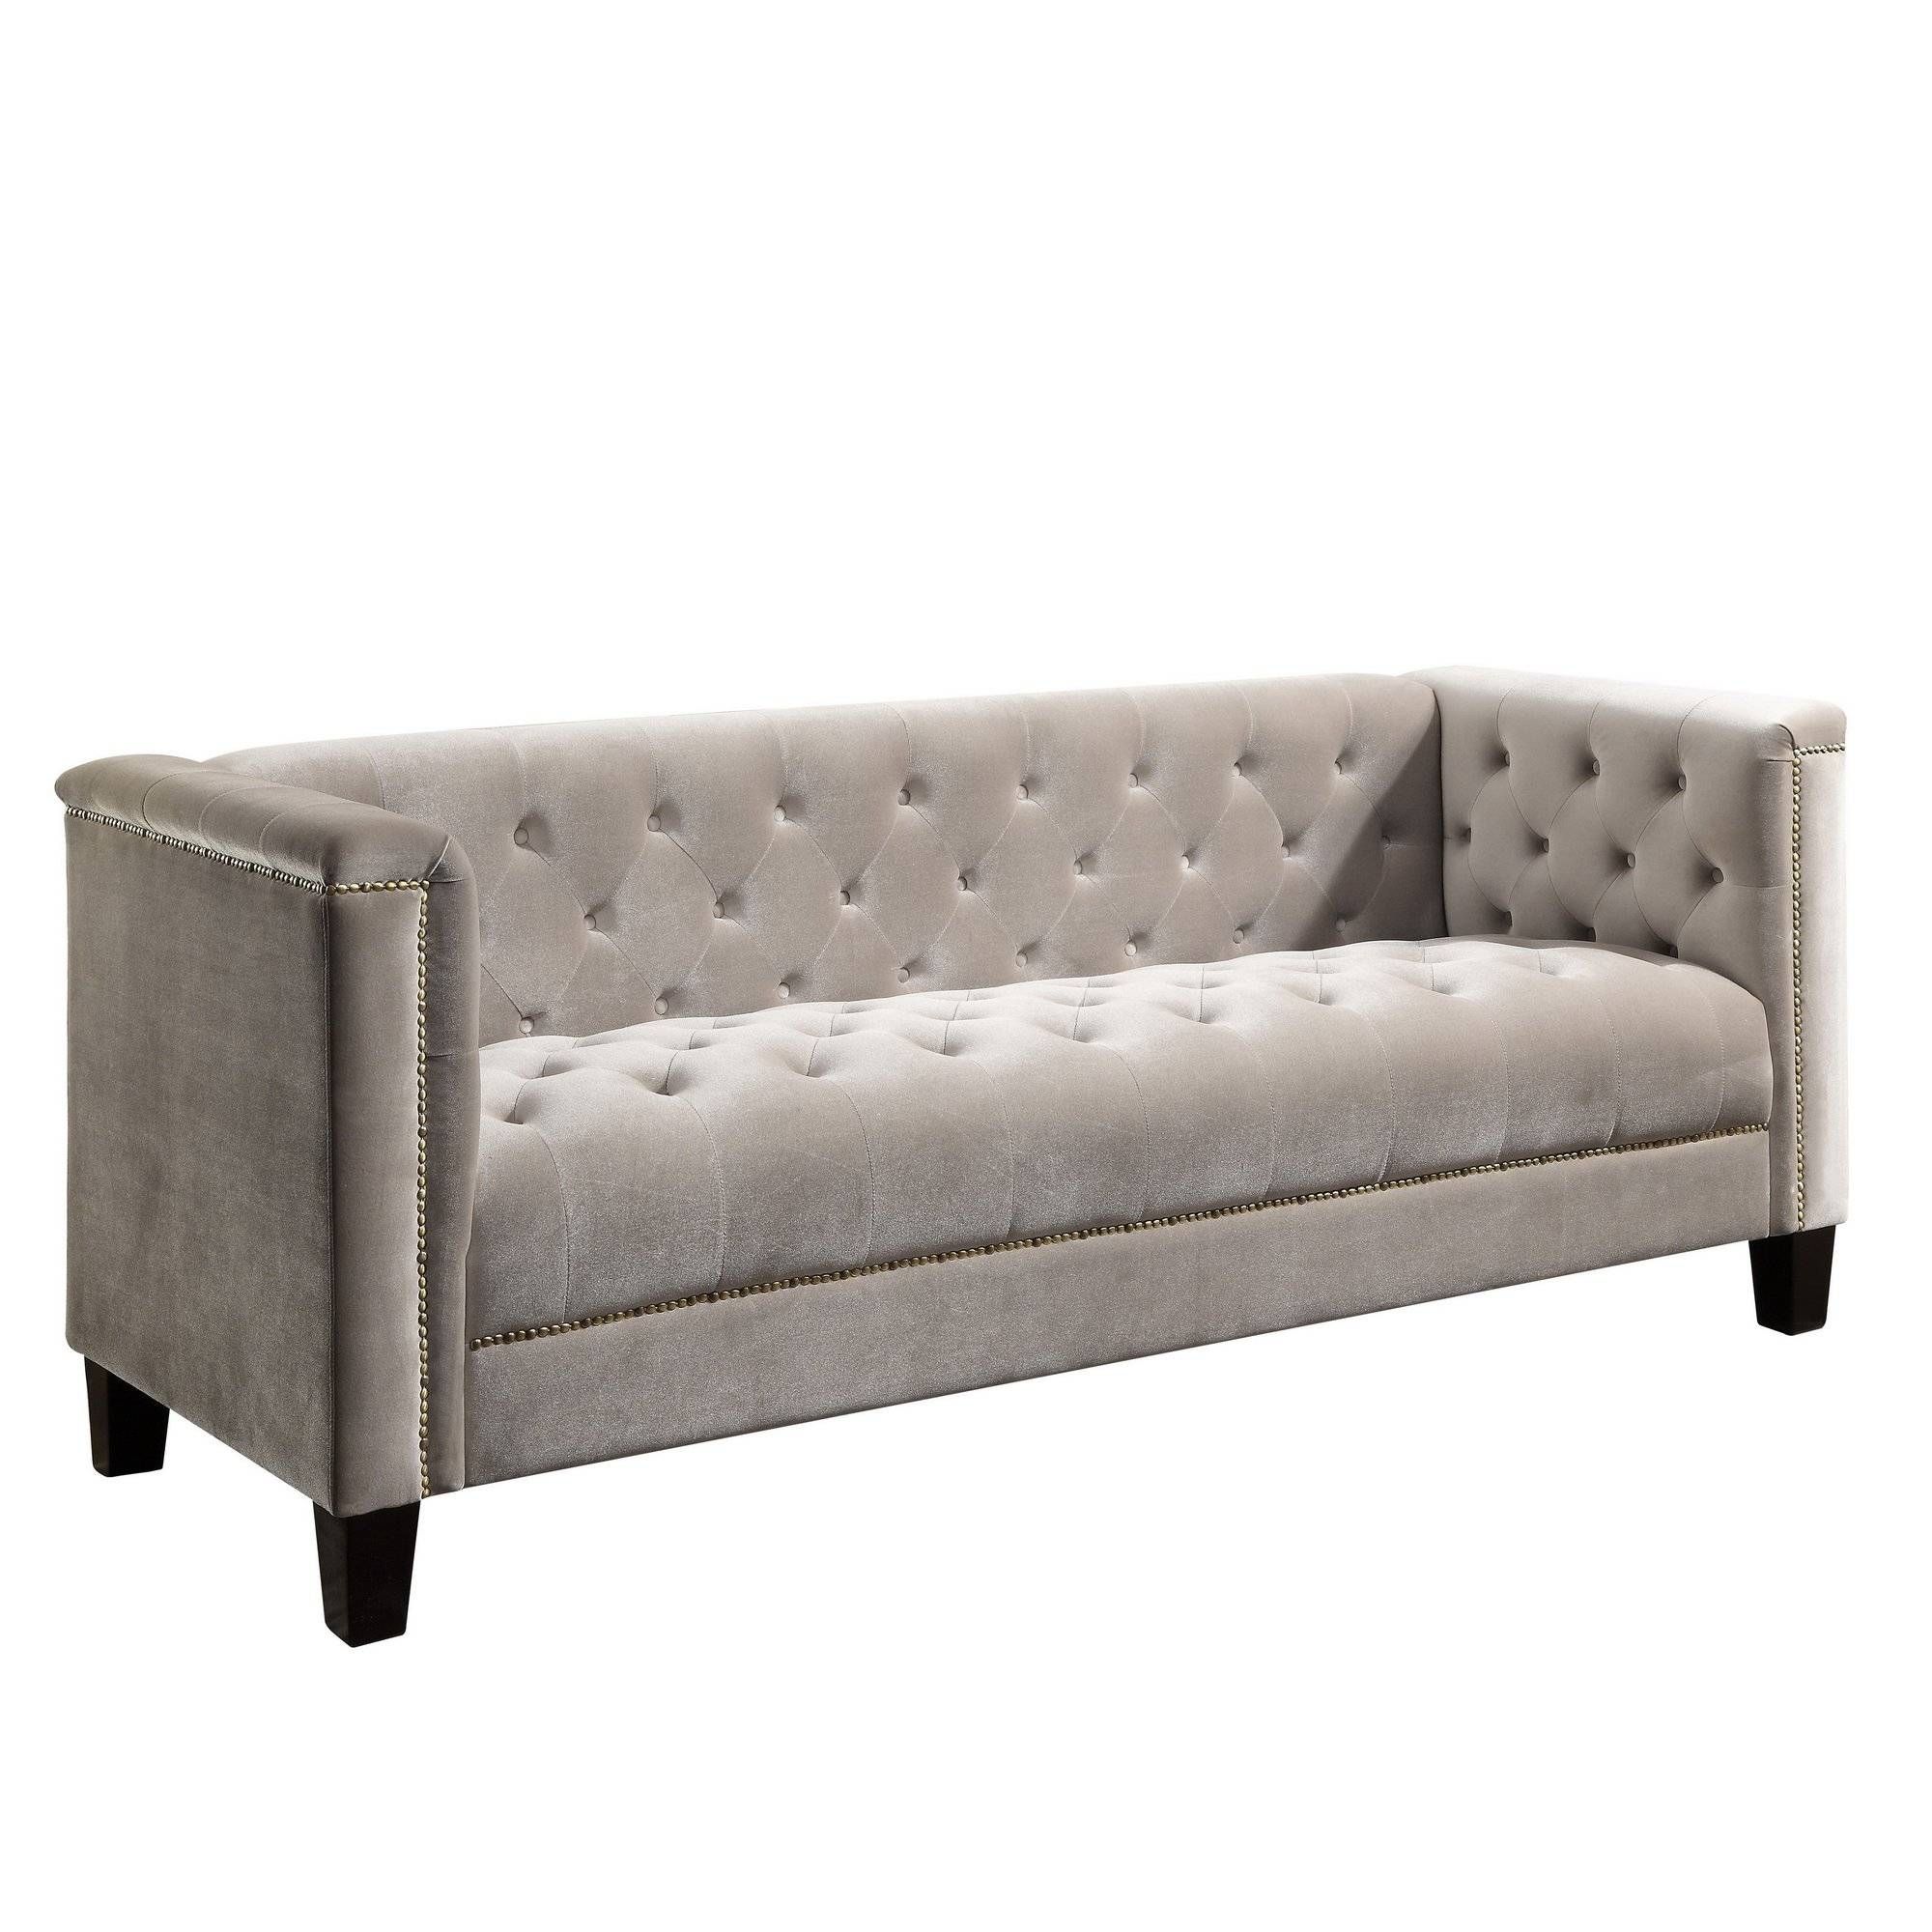 Dowe Tufted Chesterfield Sofa & Reviews | Allmodern In Small Chesterfield Sofas (View 22 of 30)